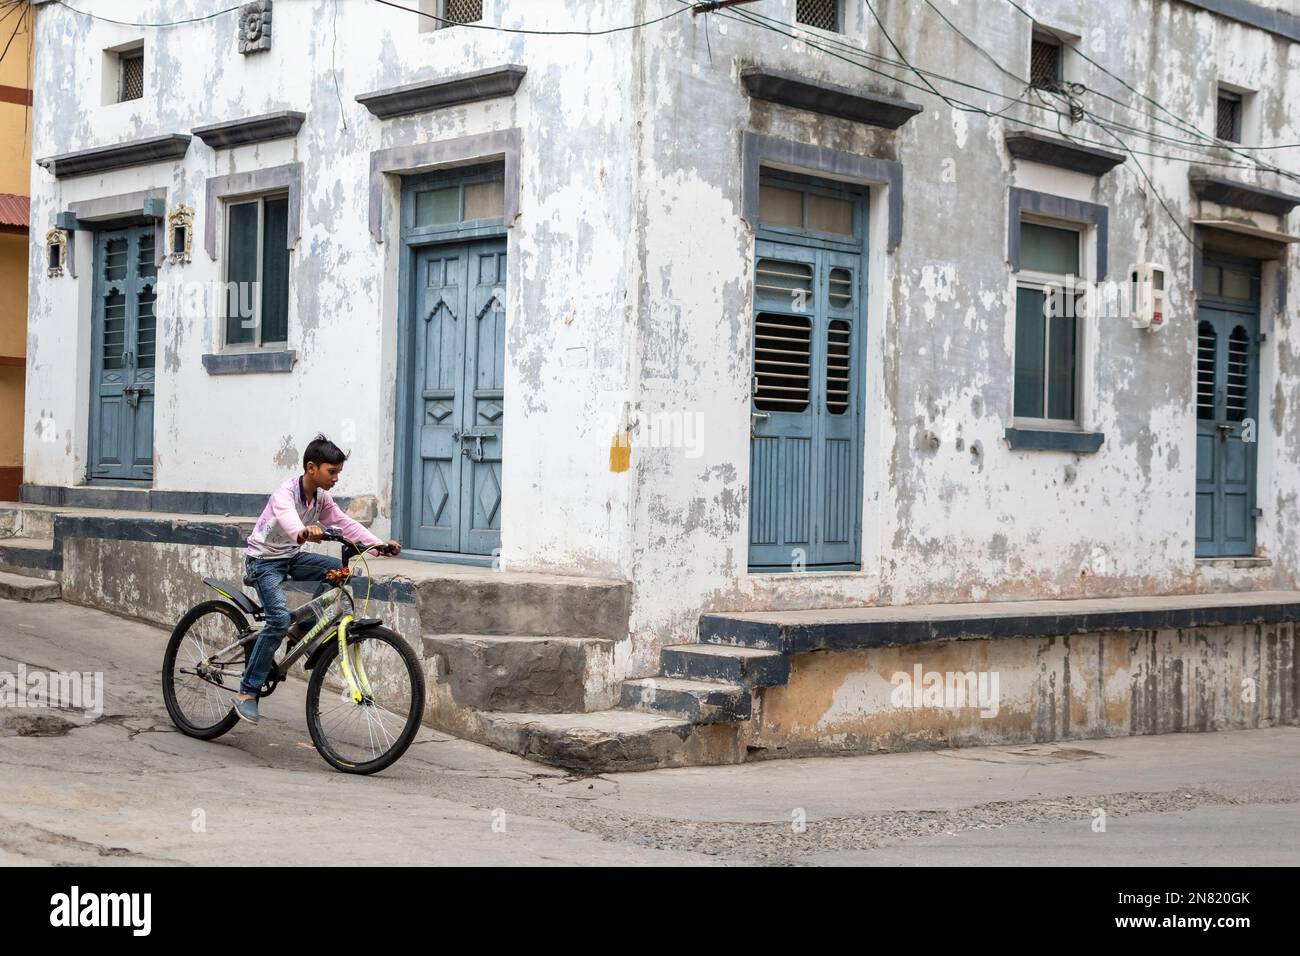 Diu, India - December 2018: A young boy riding a bicycle on a street with old Portuguese era houses in the island town of Diu. Stock Photo